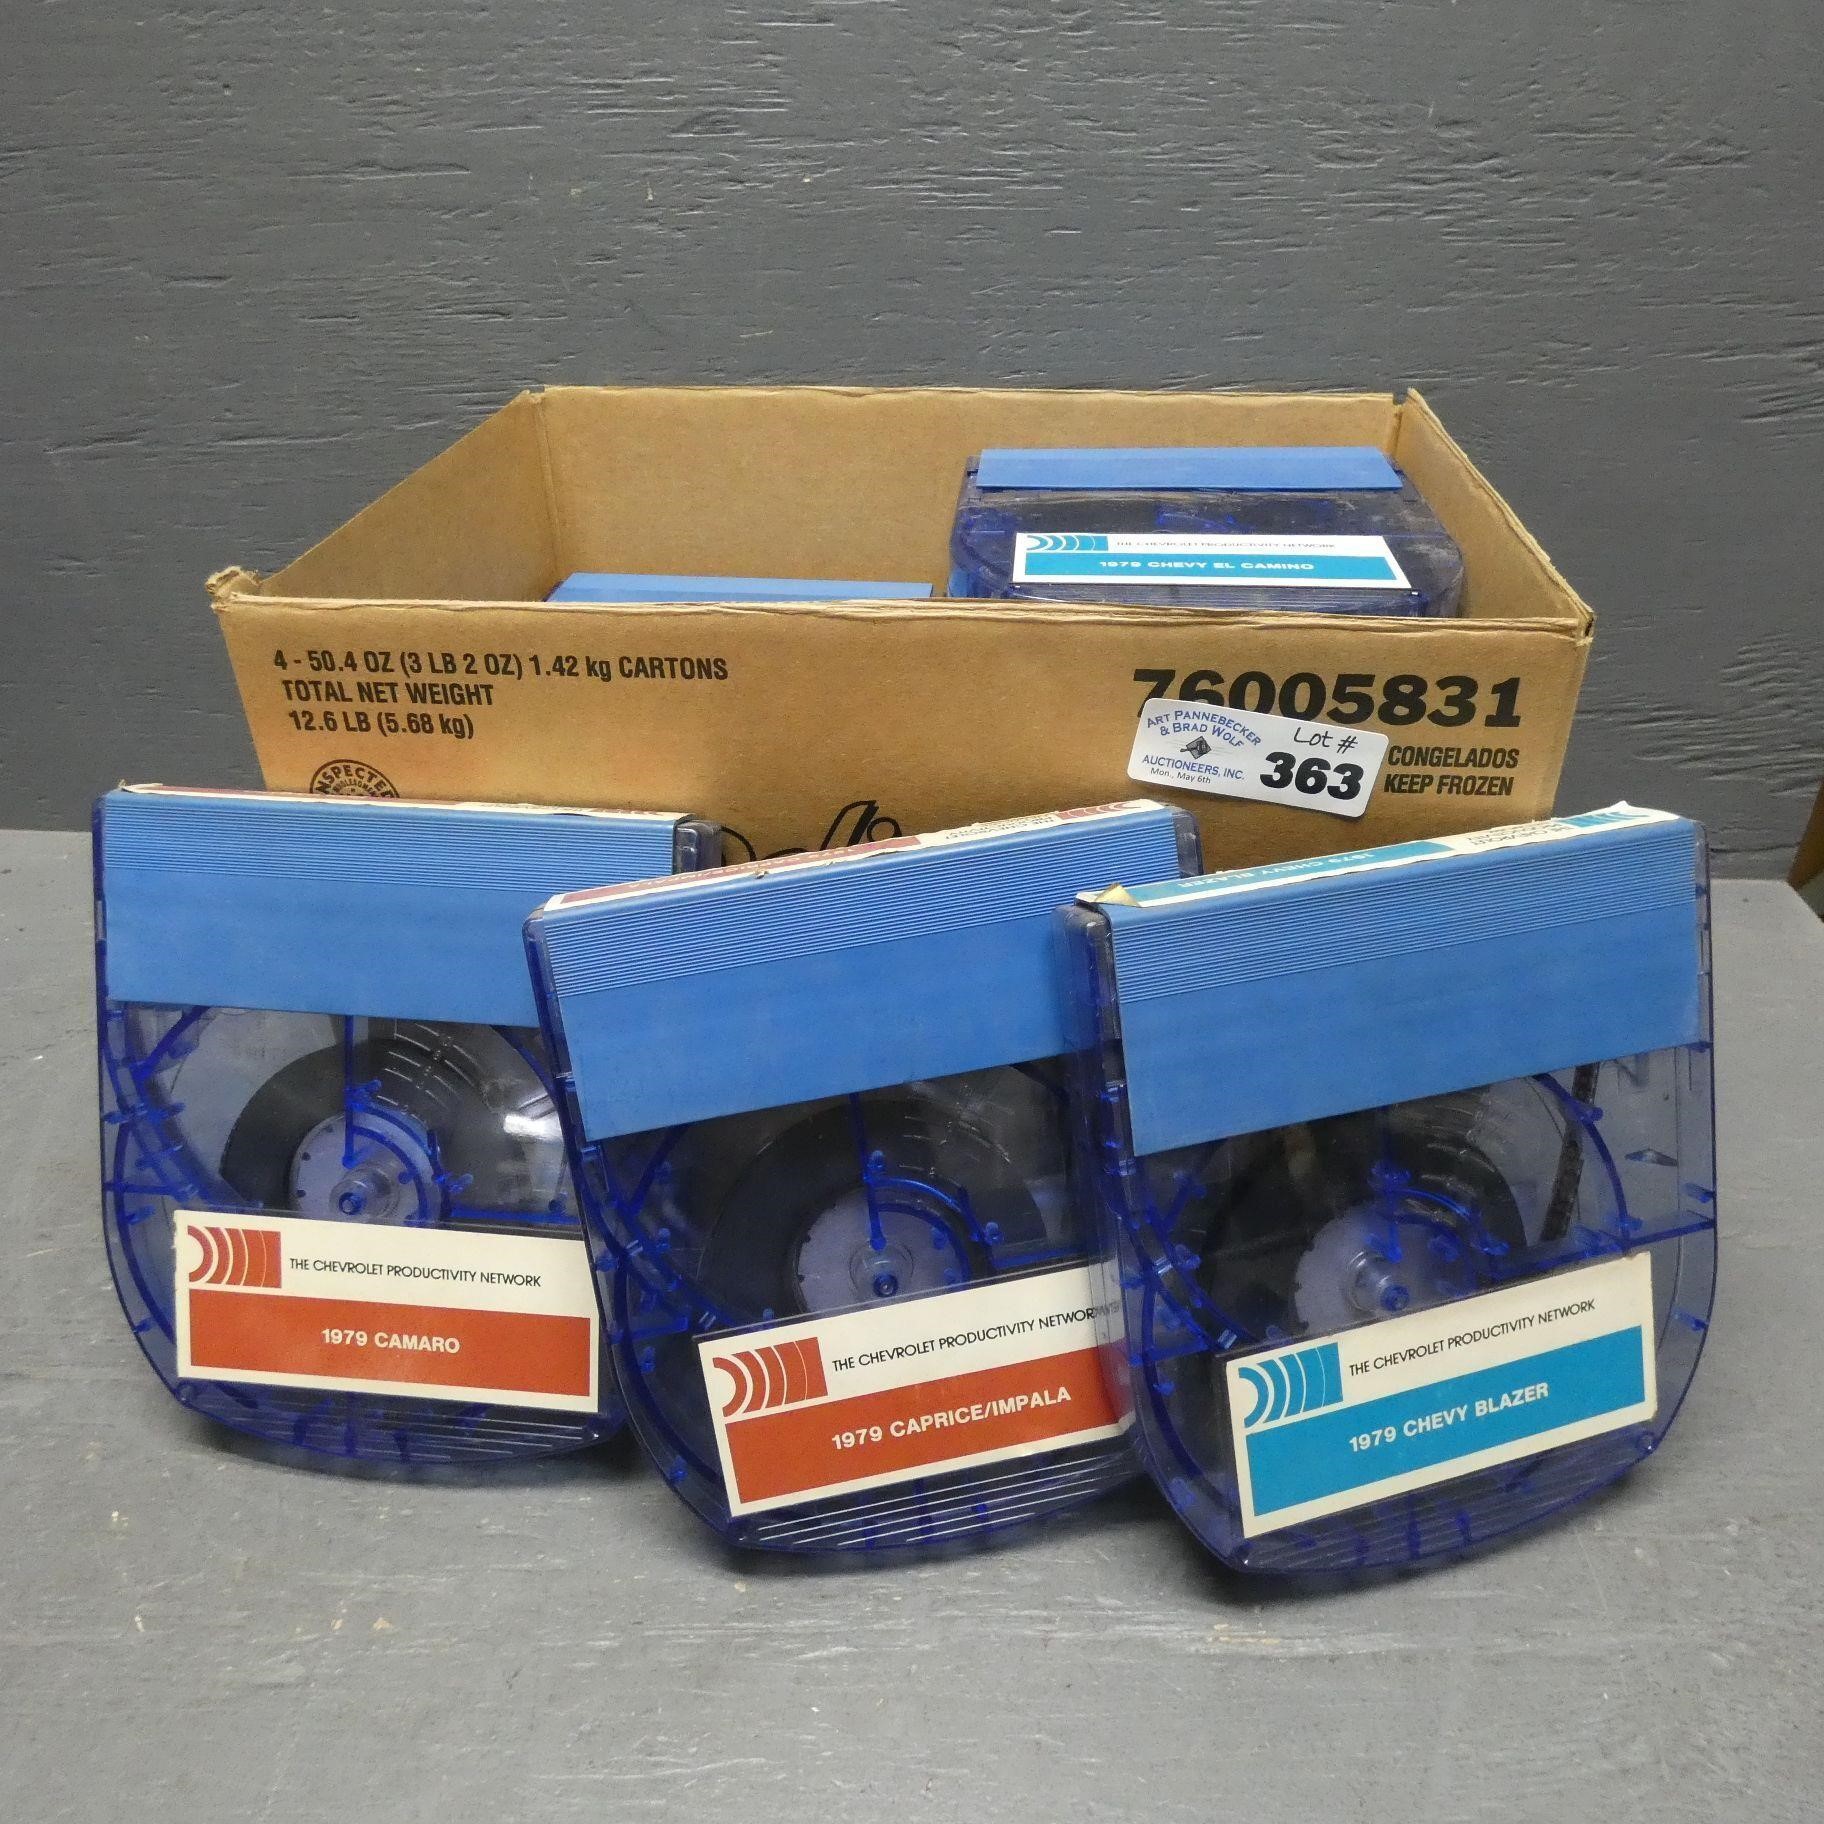 Chevrolet Productivity Network Car Tapes